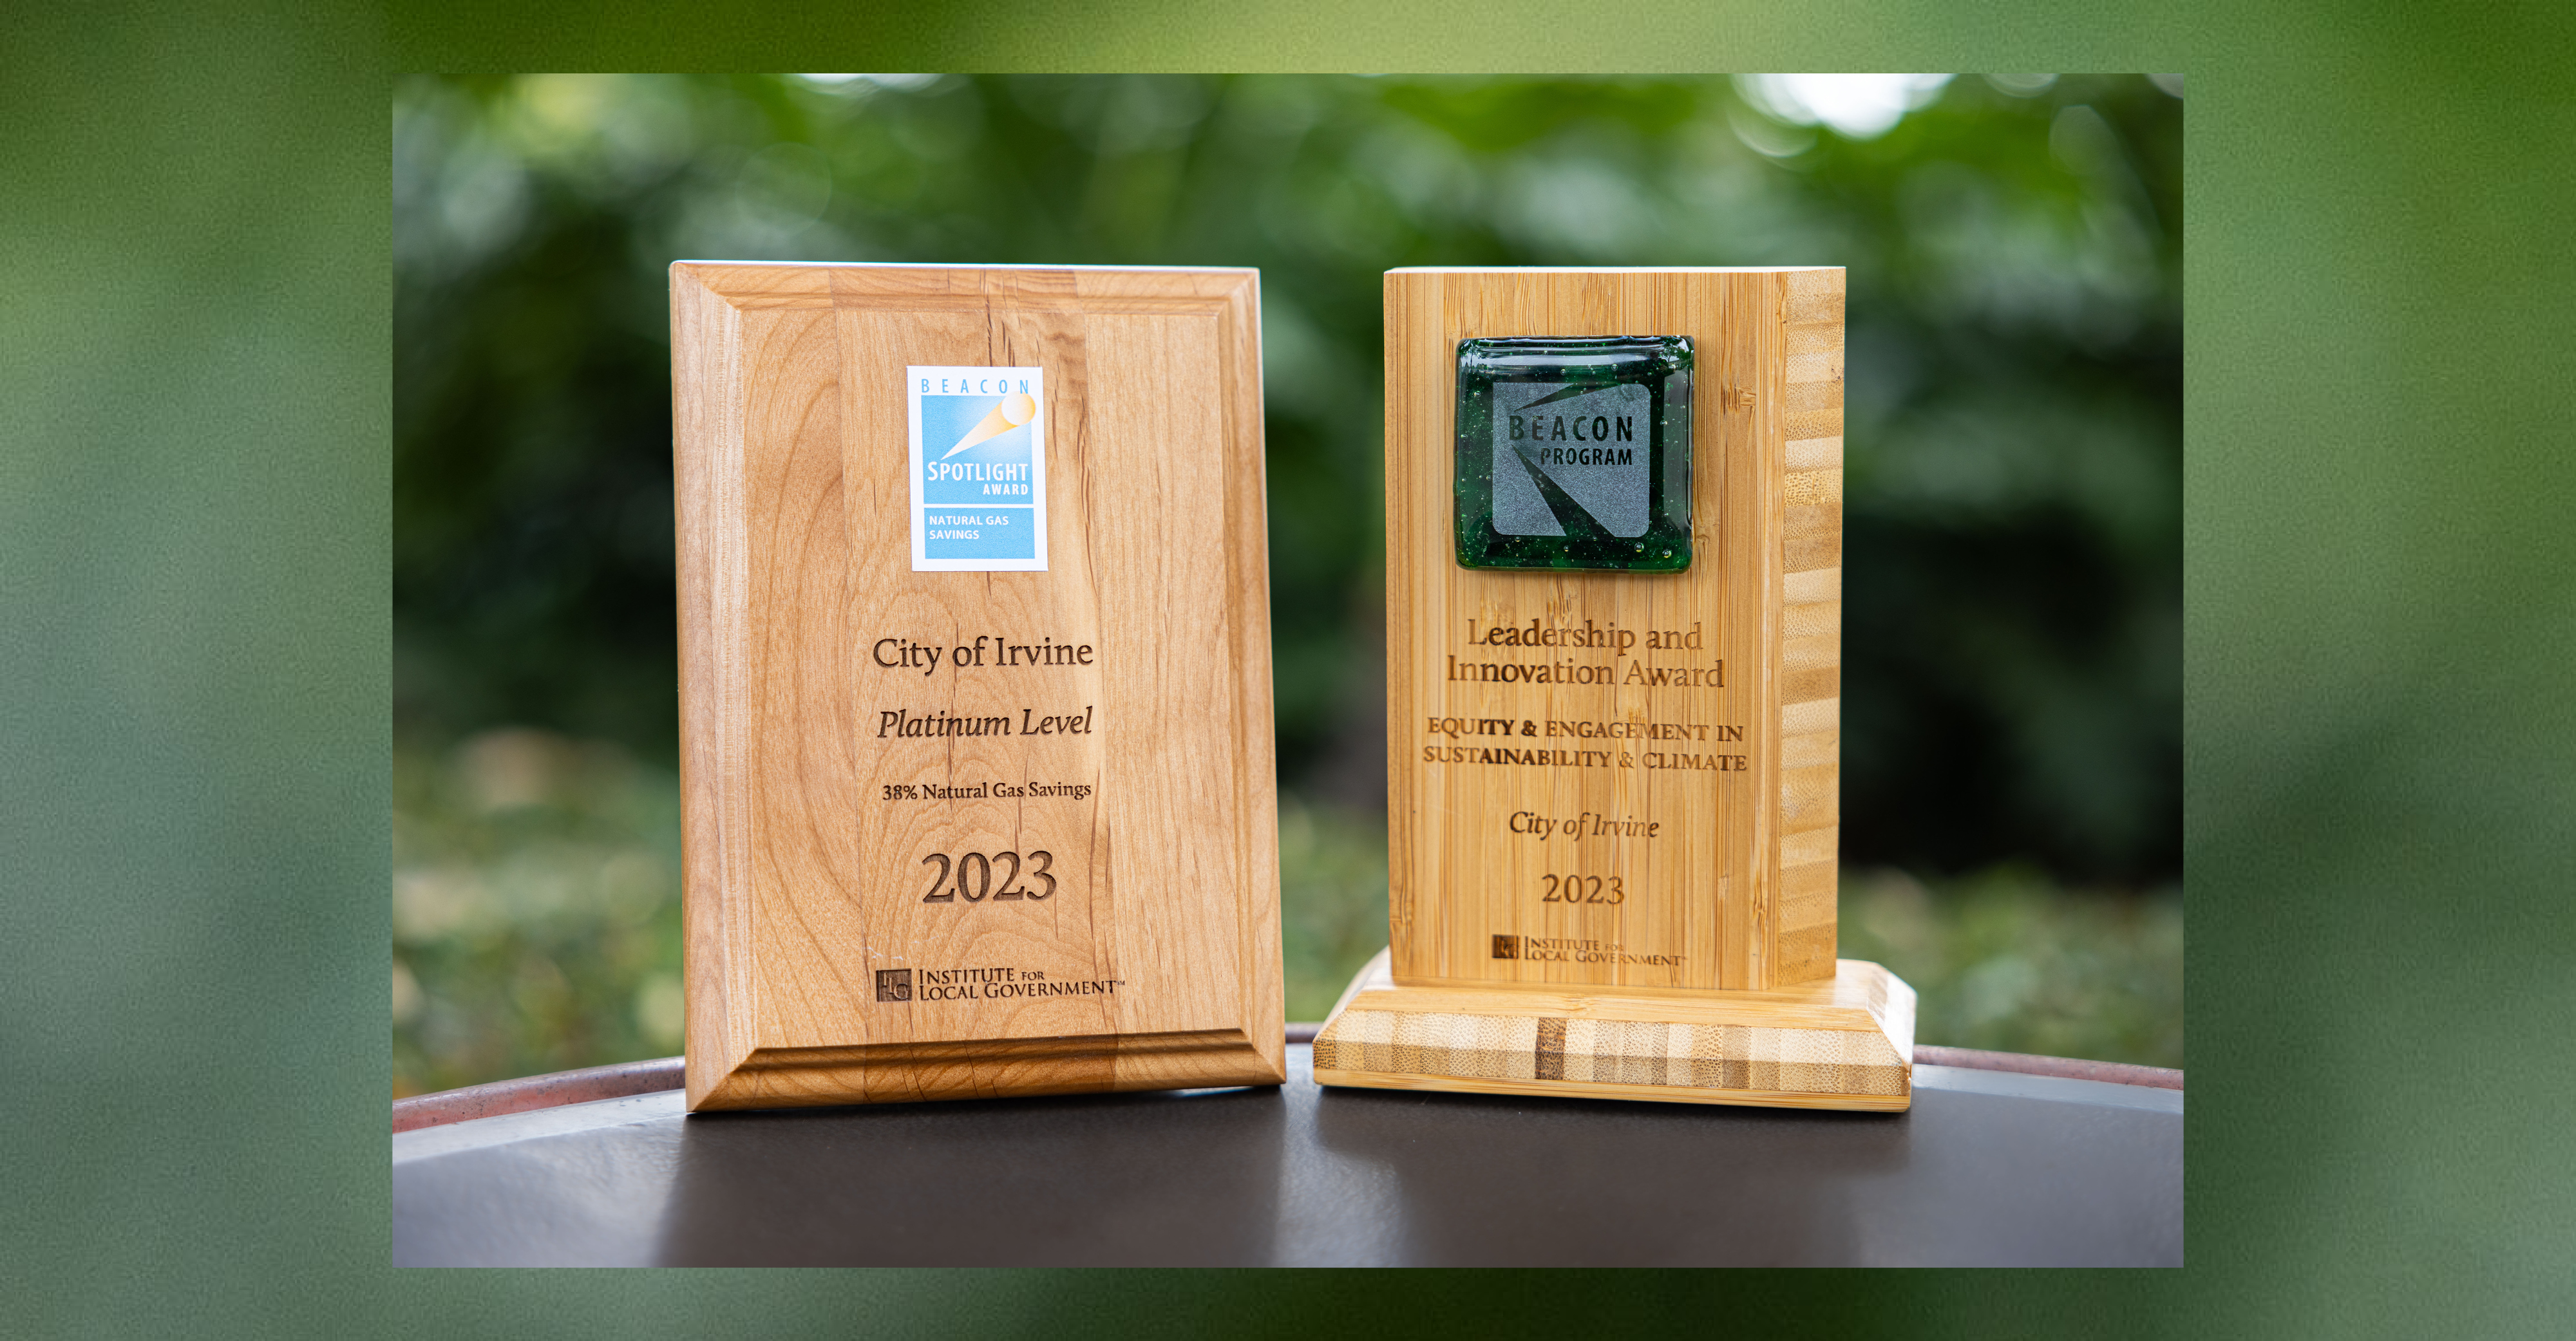 City of Irvine Recognized for Leadership and Innovation in Sustainability